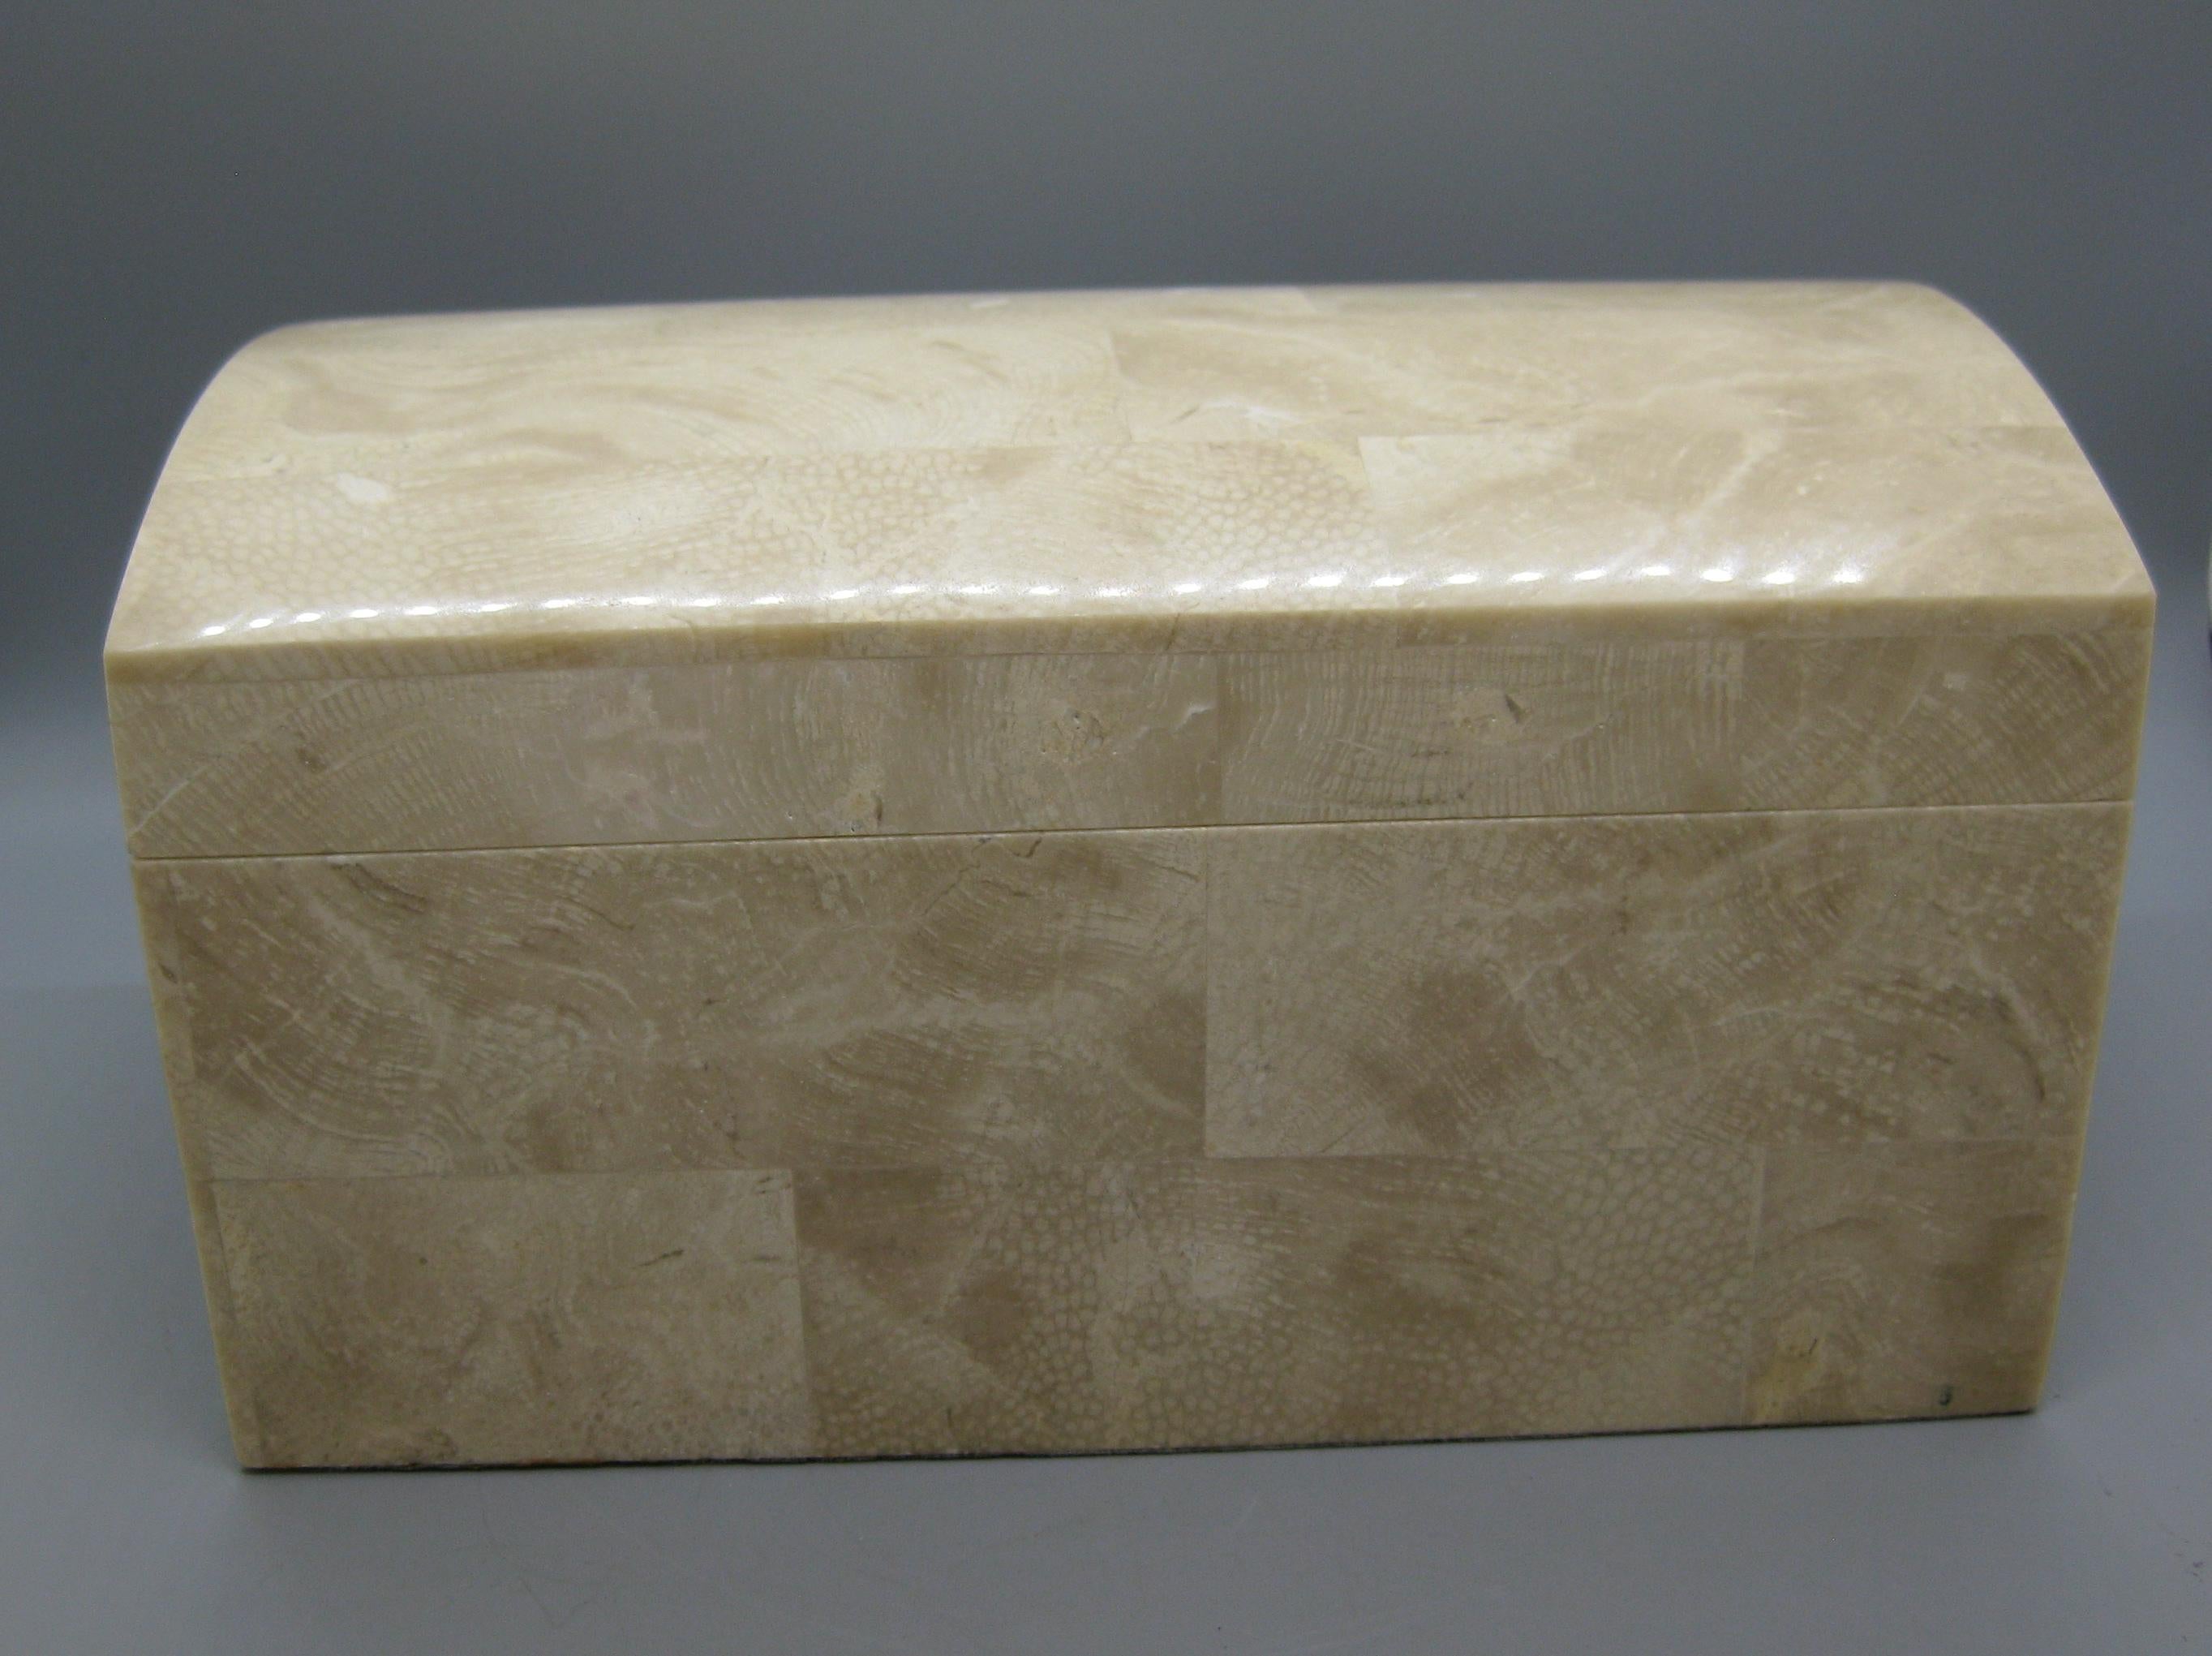 Maitland Smith Tessellated Stone Fossilized Coral Decorative Wood Stash Dome Box In Excellent Condition For Sale In San Diego, CA